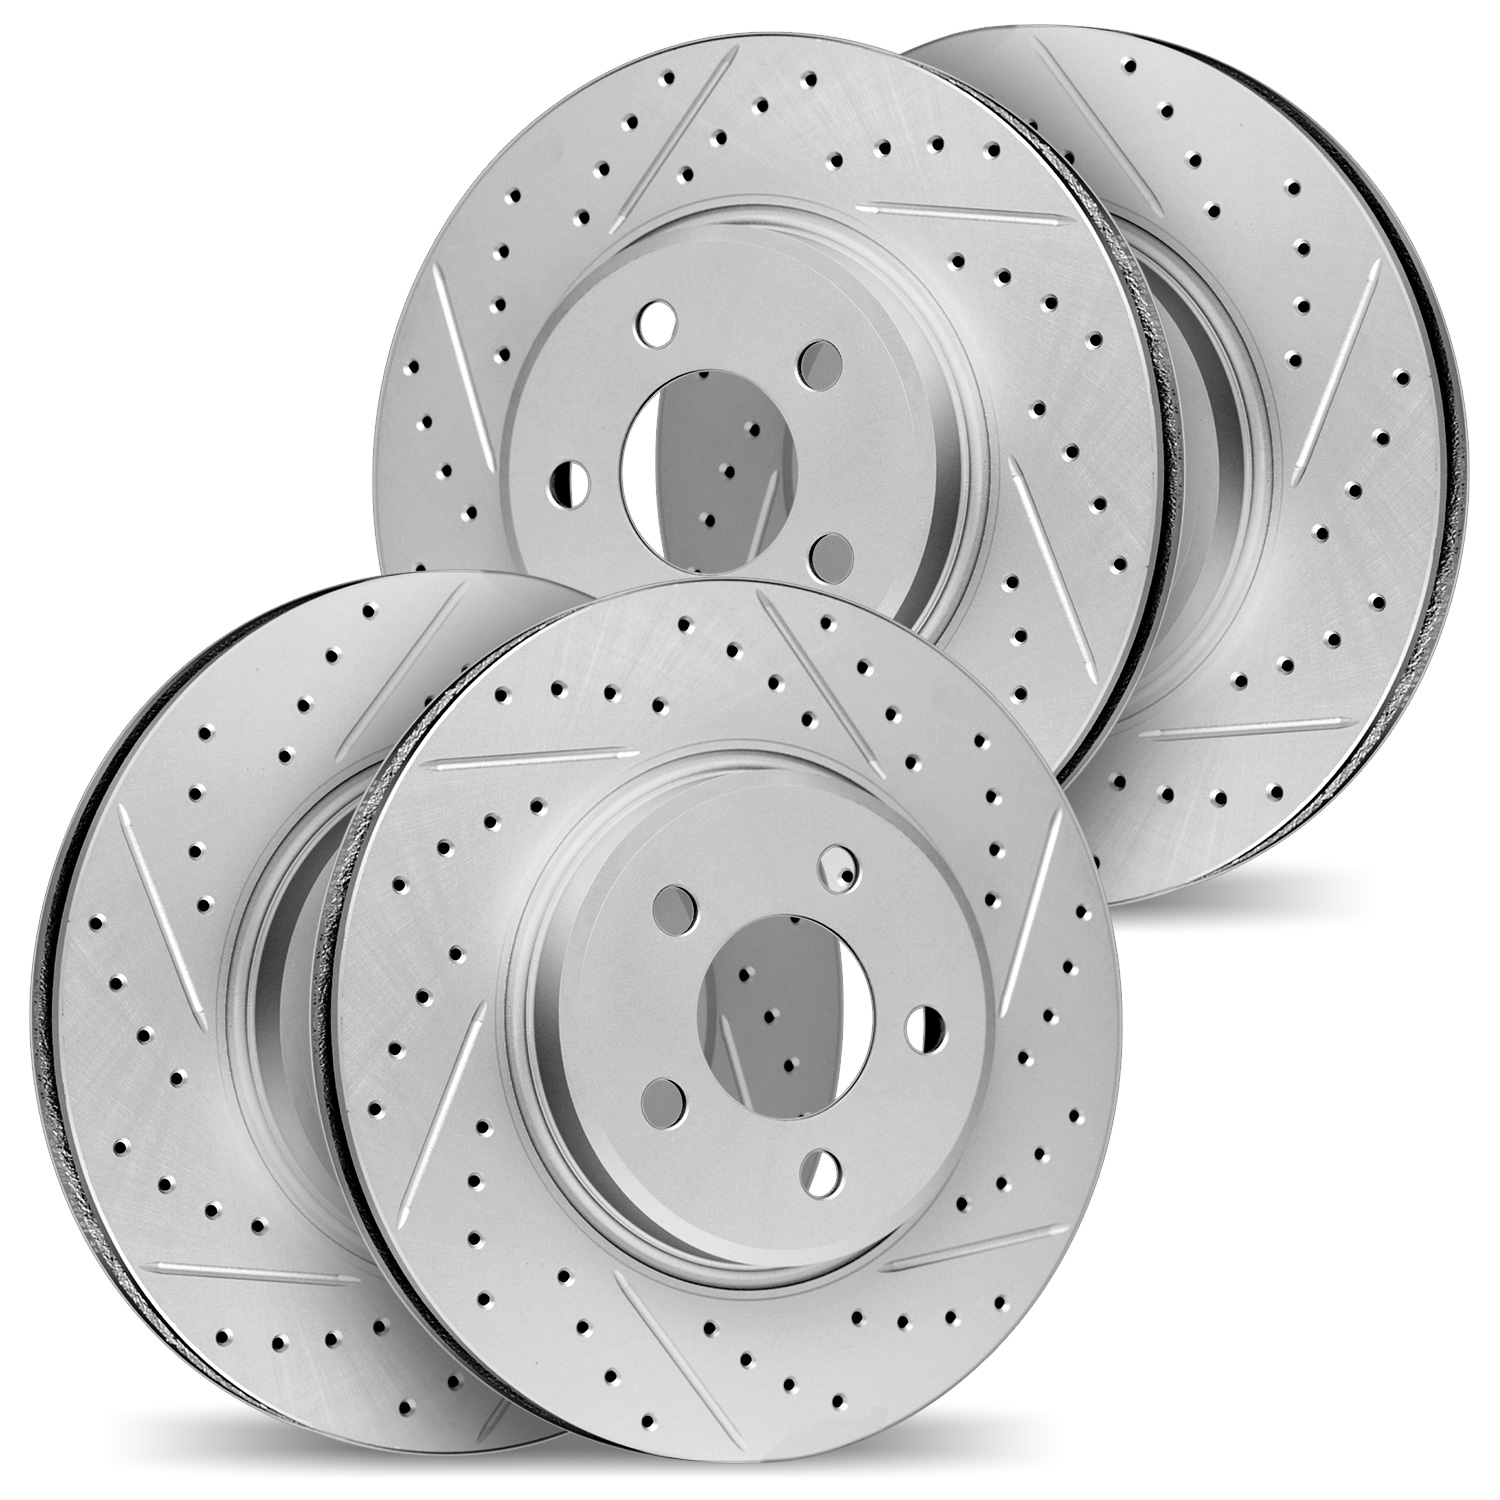 2004-73025 Geoperformance Drilled/Slotted Brake Rotors, 2005-2011 Audi/Volkswagen, Position: Front and Rear